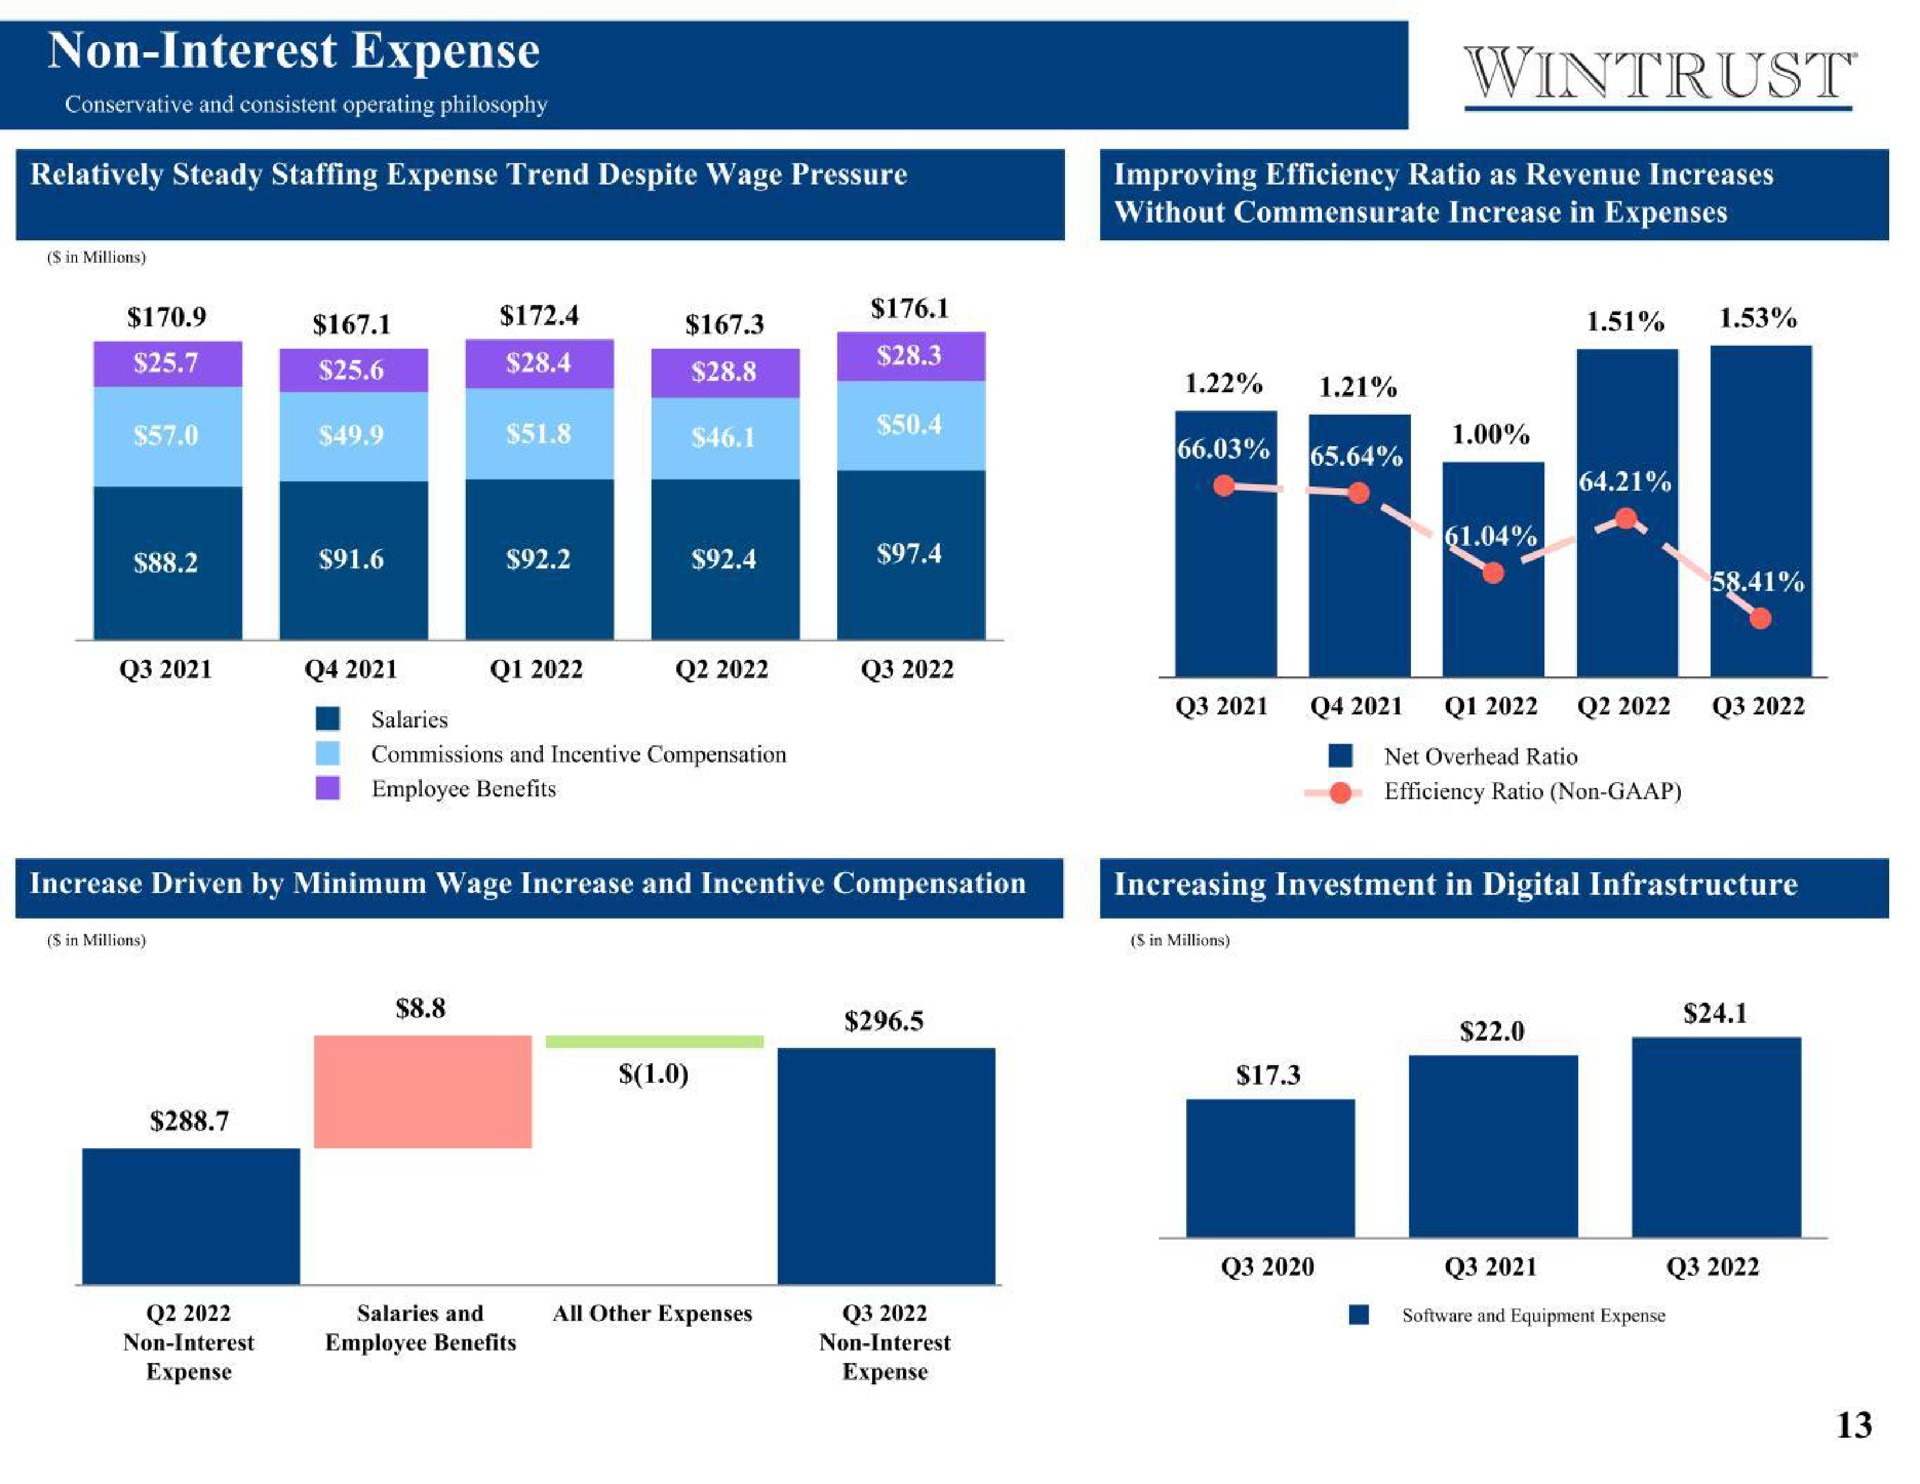 non interest expense increase driven by minimum wage increase and incentive compensation hie | Wintrust Financial